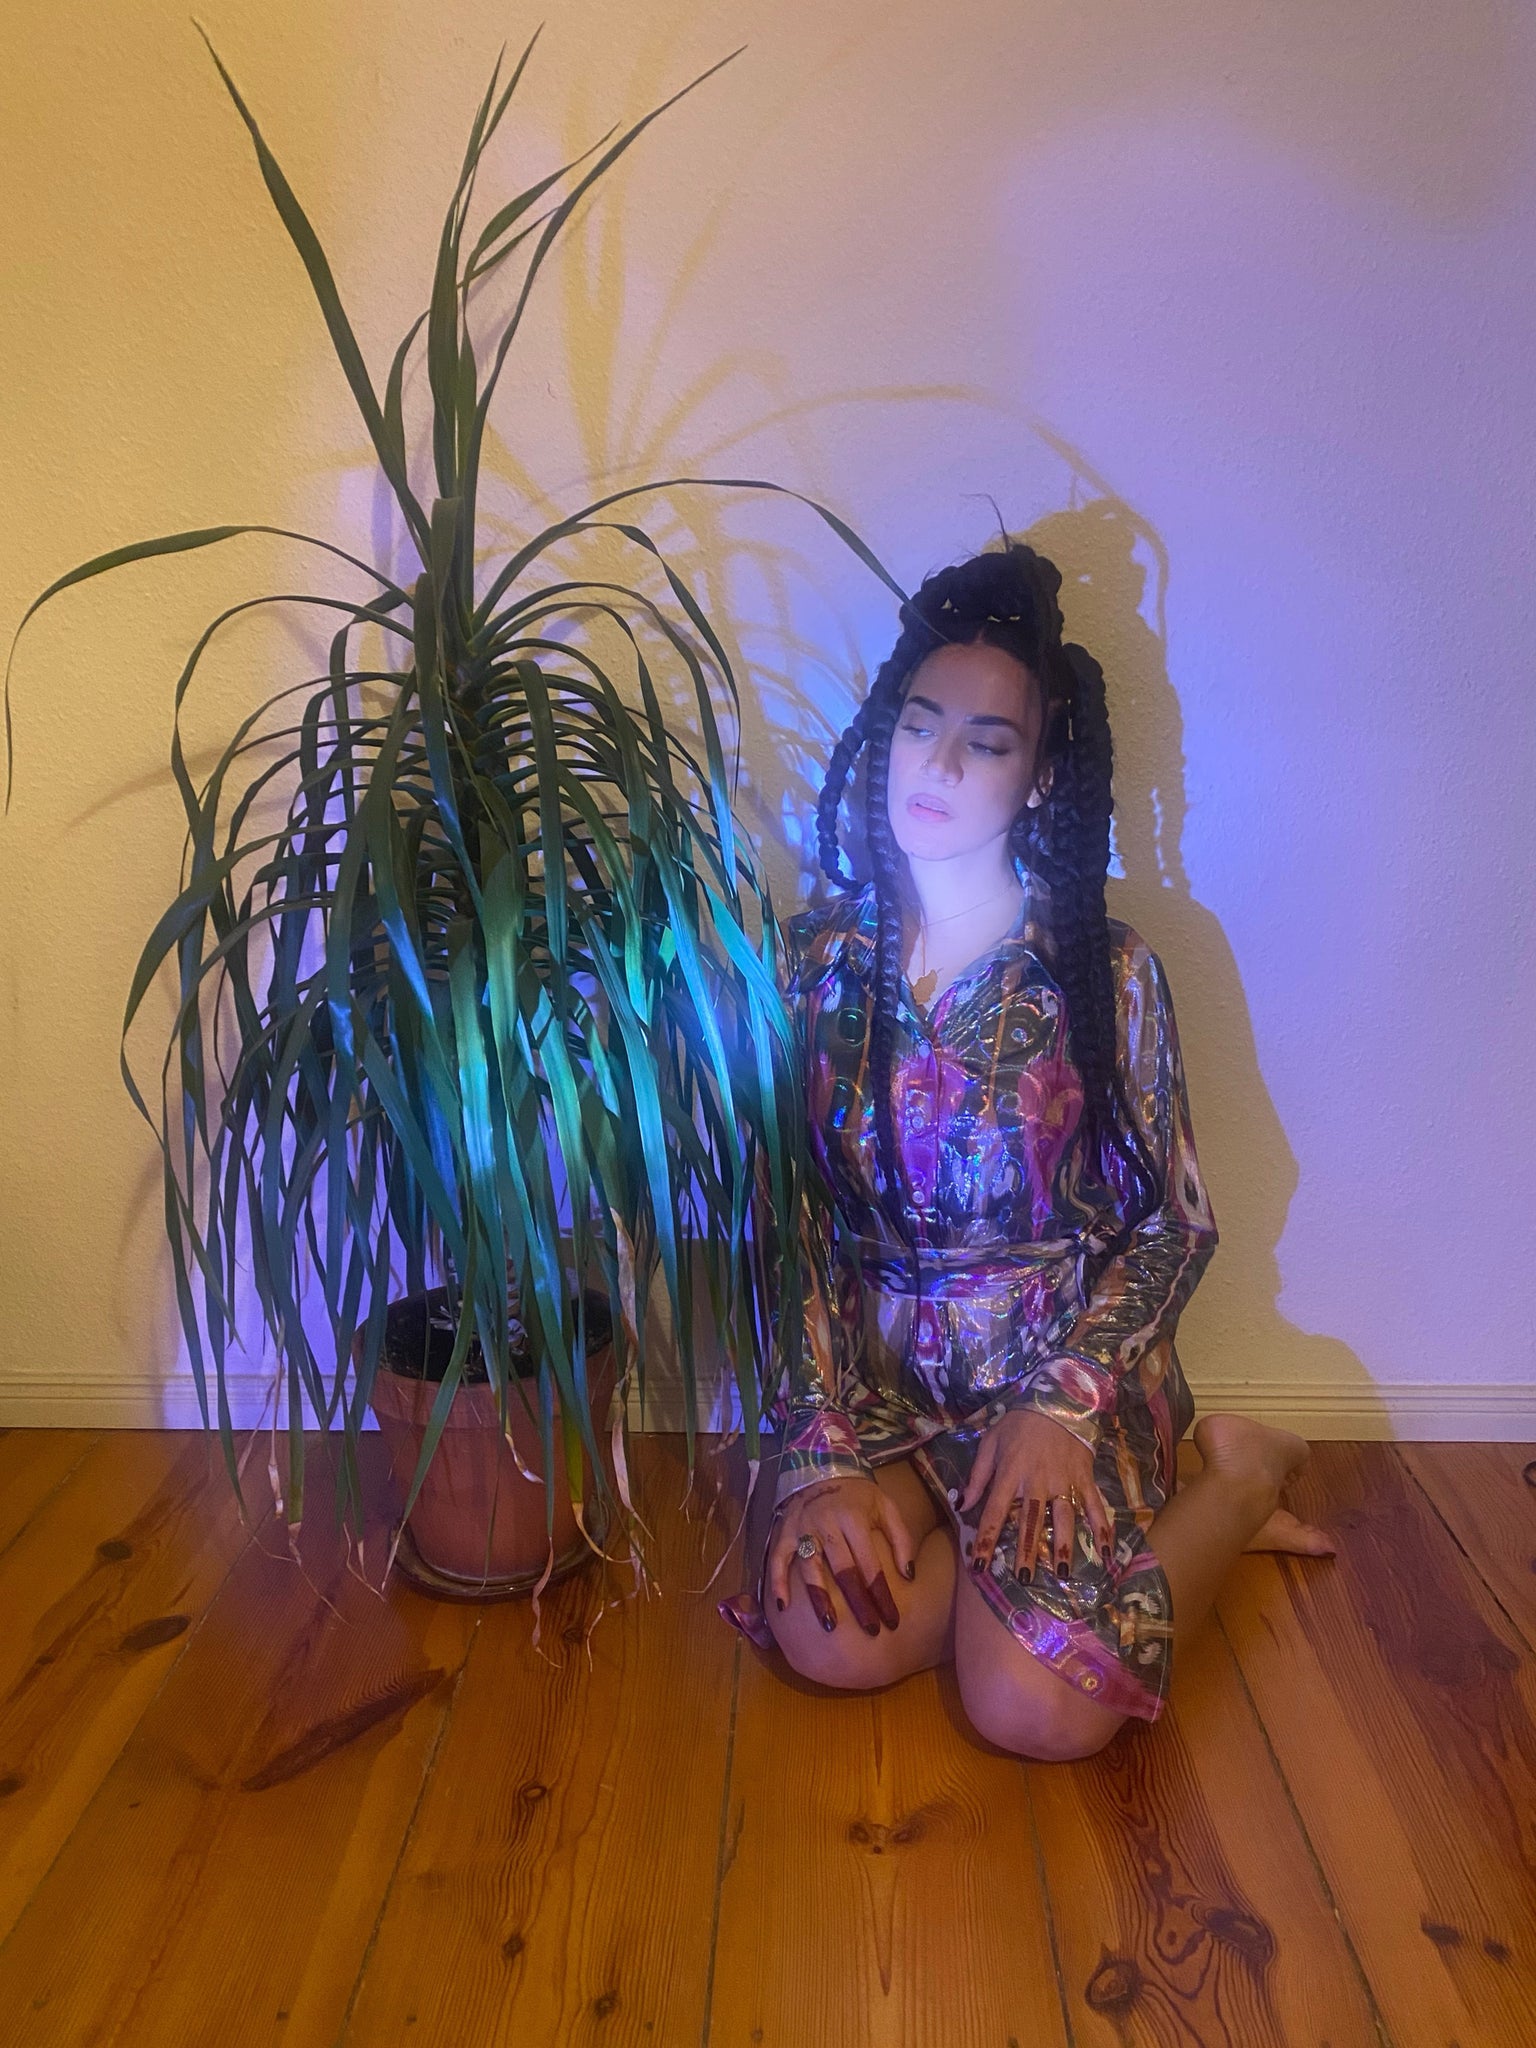 A woman sits next to a plant, wearing a holographic psychadelic ikat dress.